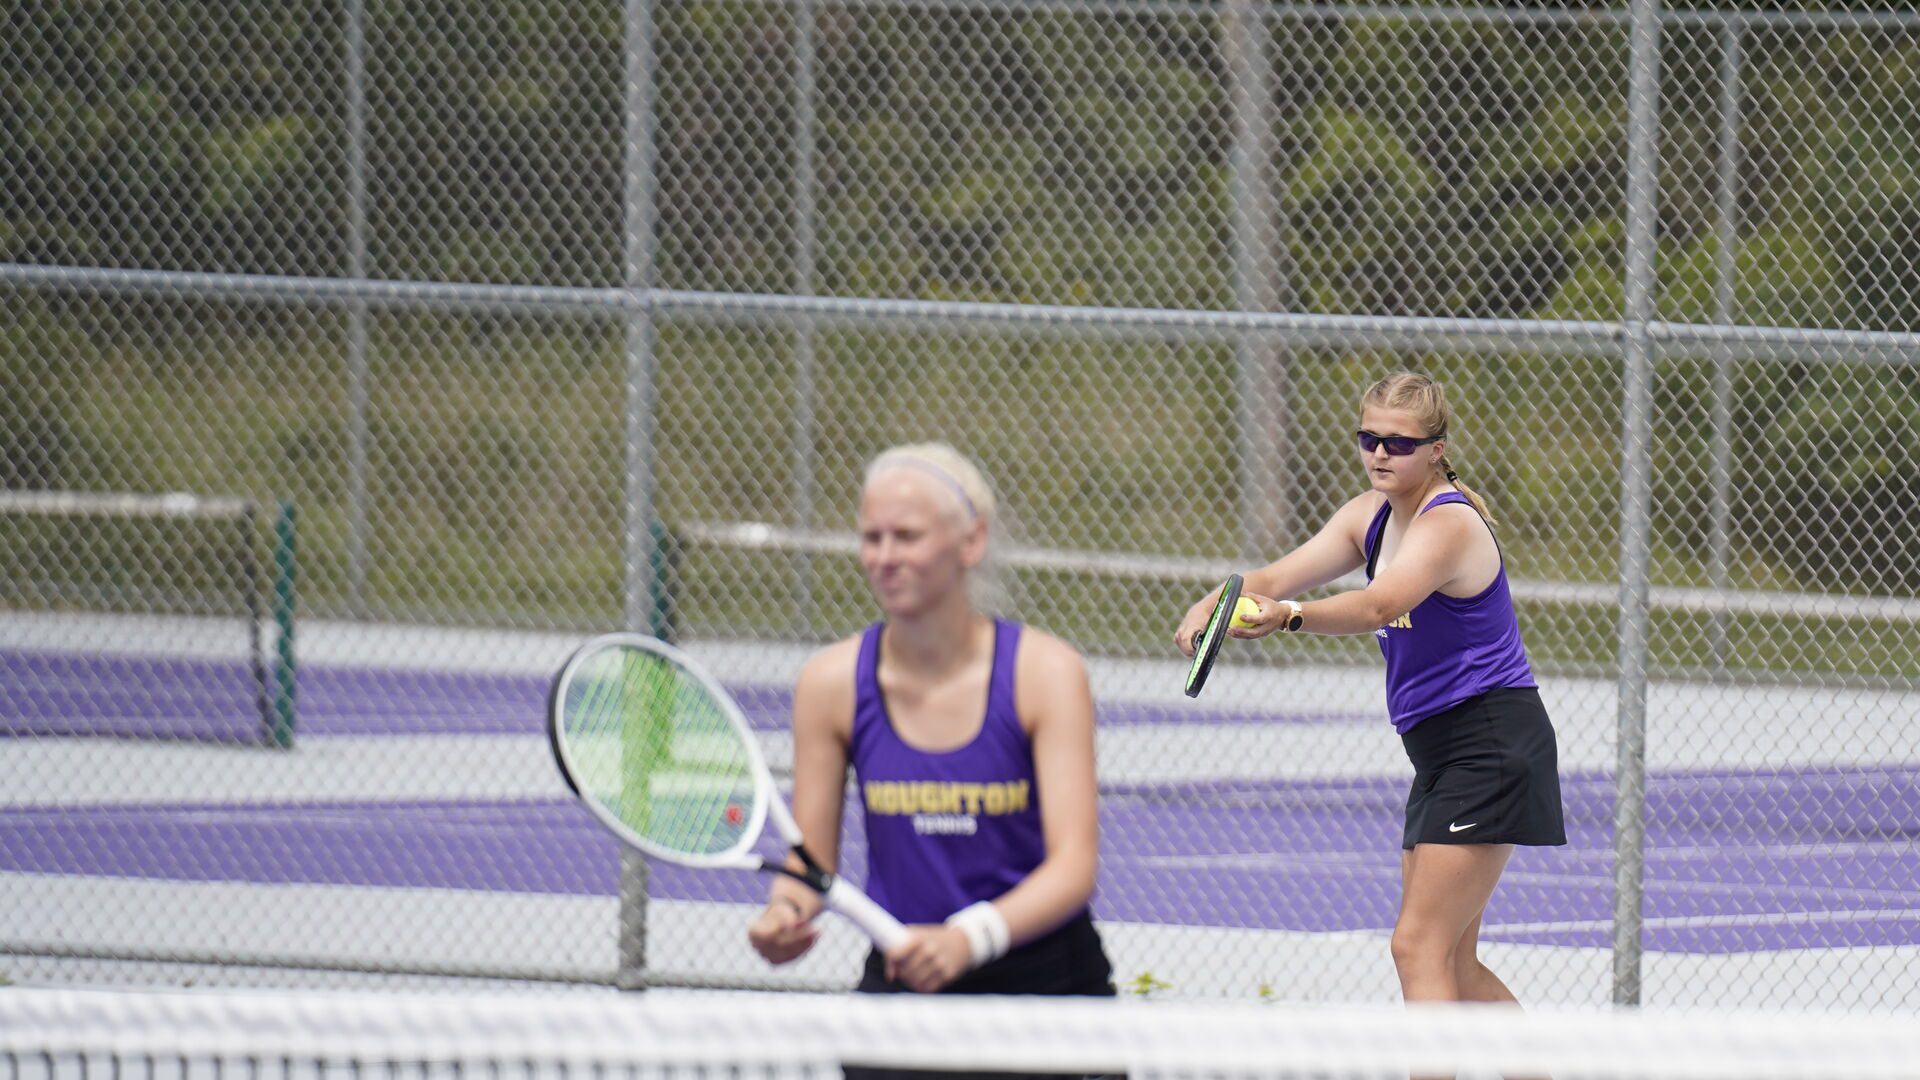 Houghton student preparing to serve during a tennis match.